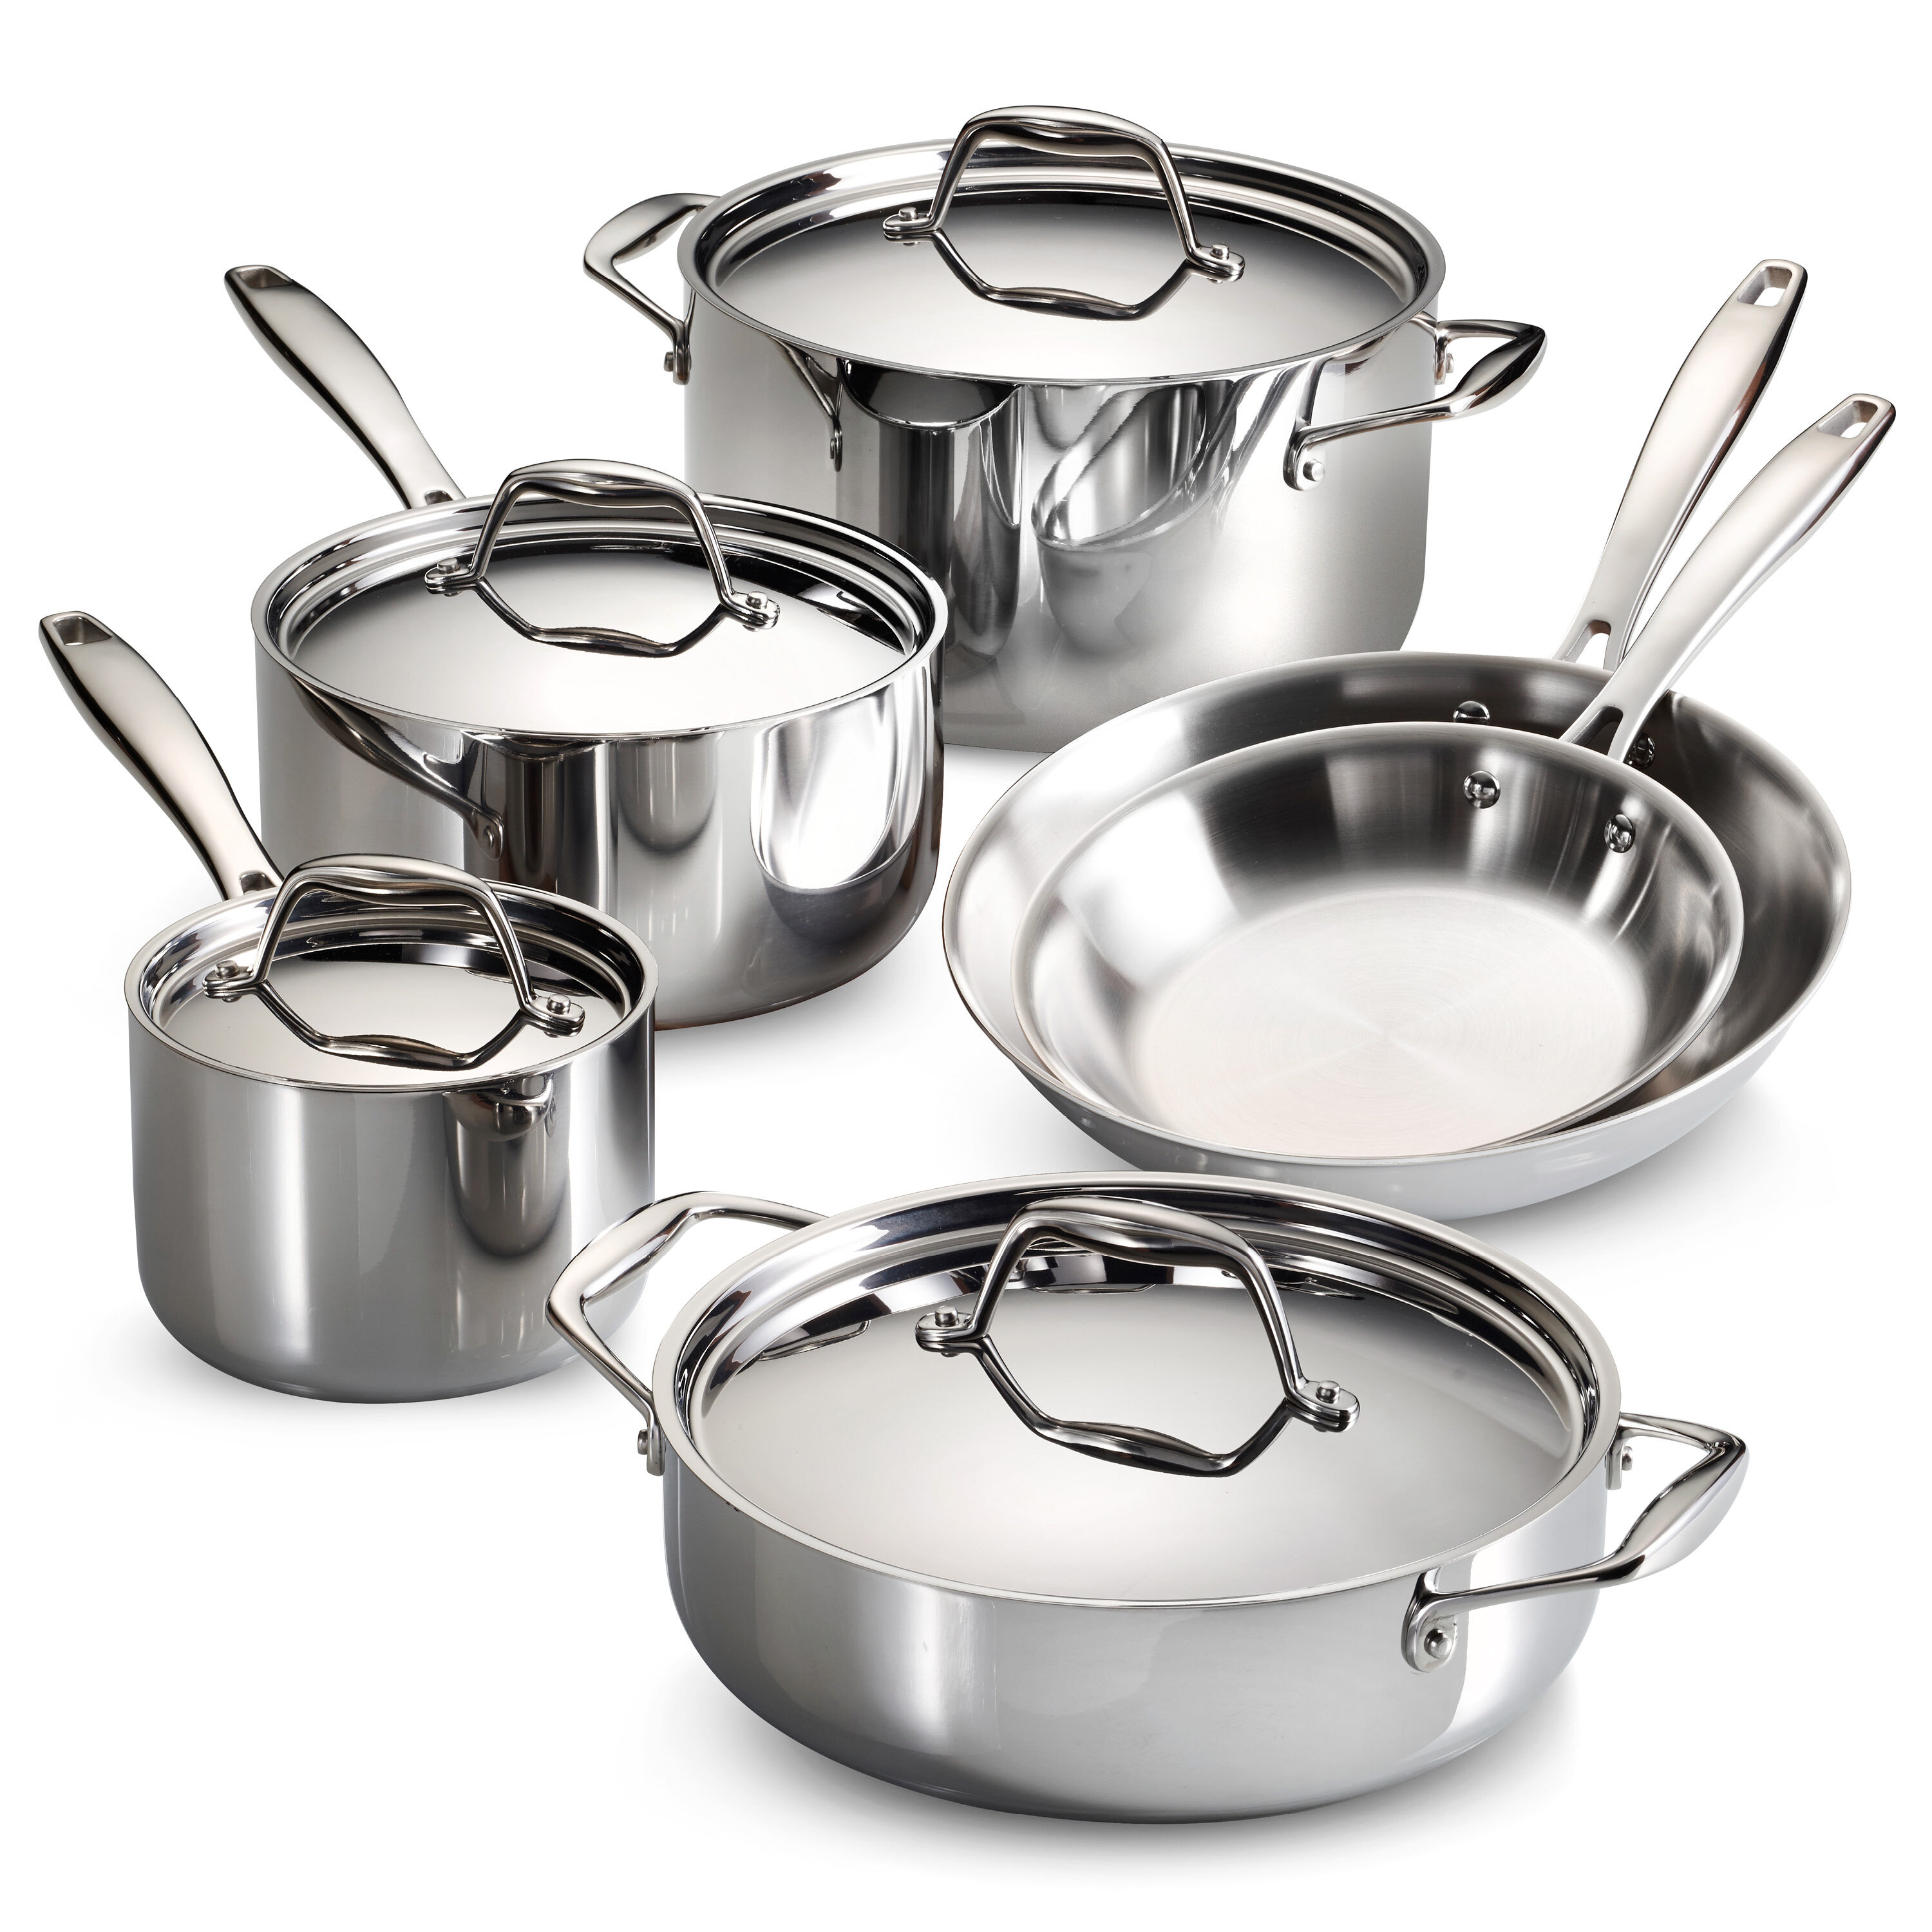 Tramontina Tri-Ply Clad Gourmet 10 Pc Cookware Set